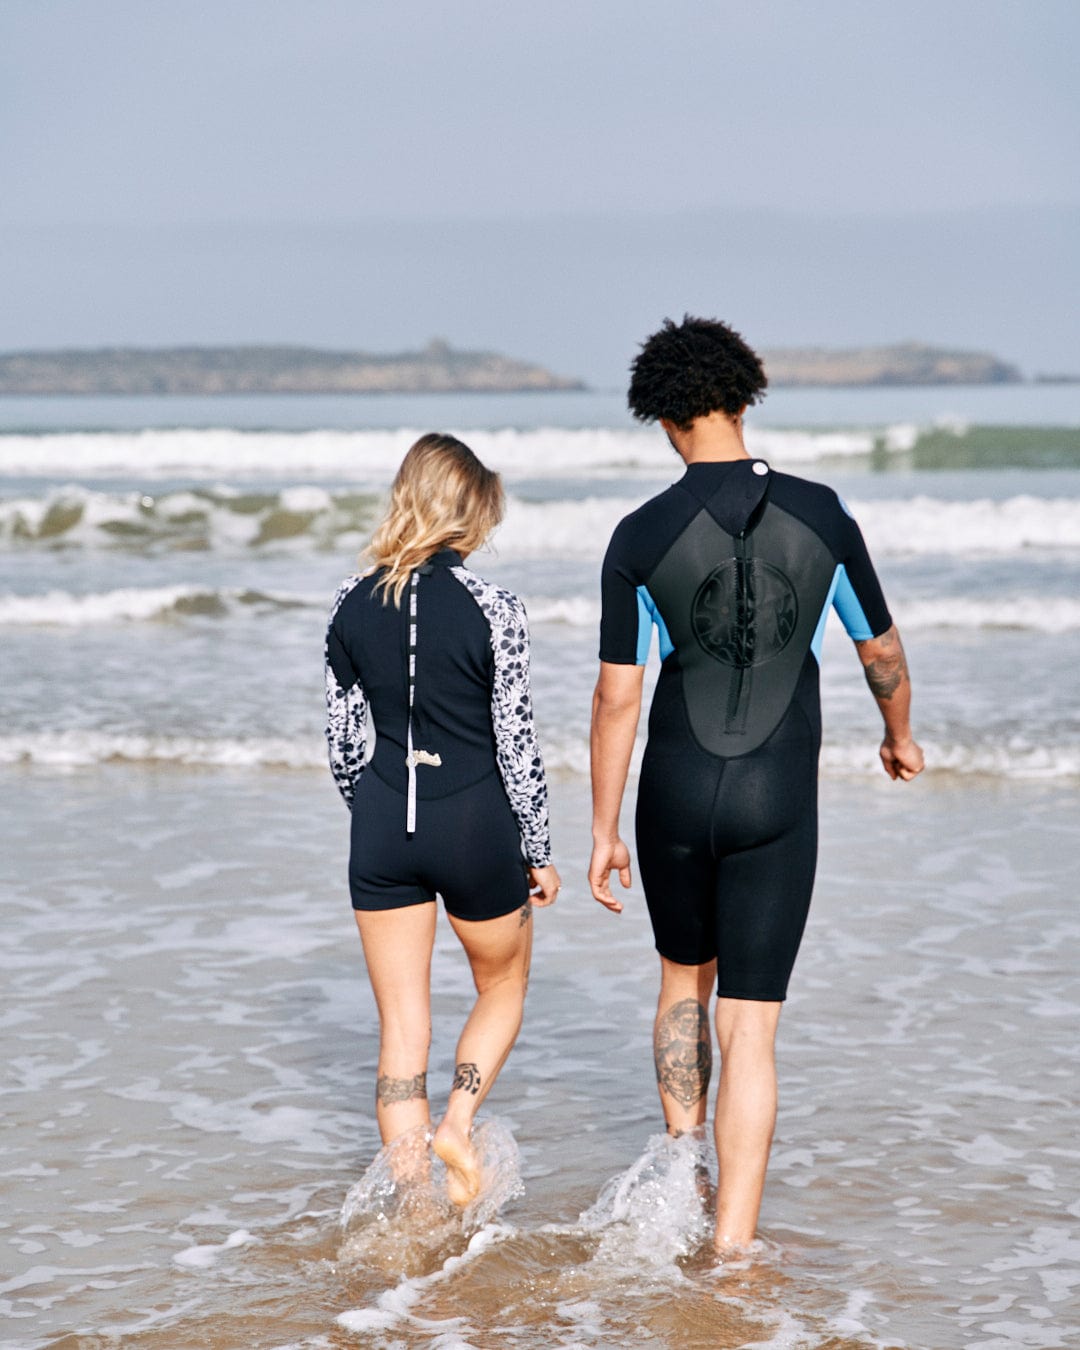 Two people in Saltrock neoprene wetsuits walking into the sea, holding hands, viewed from behind.